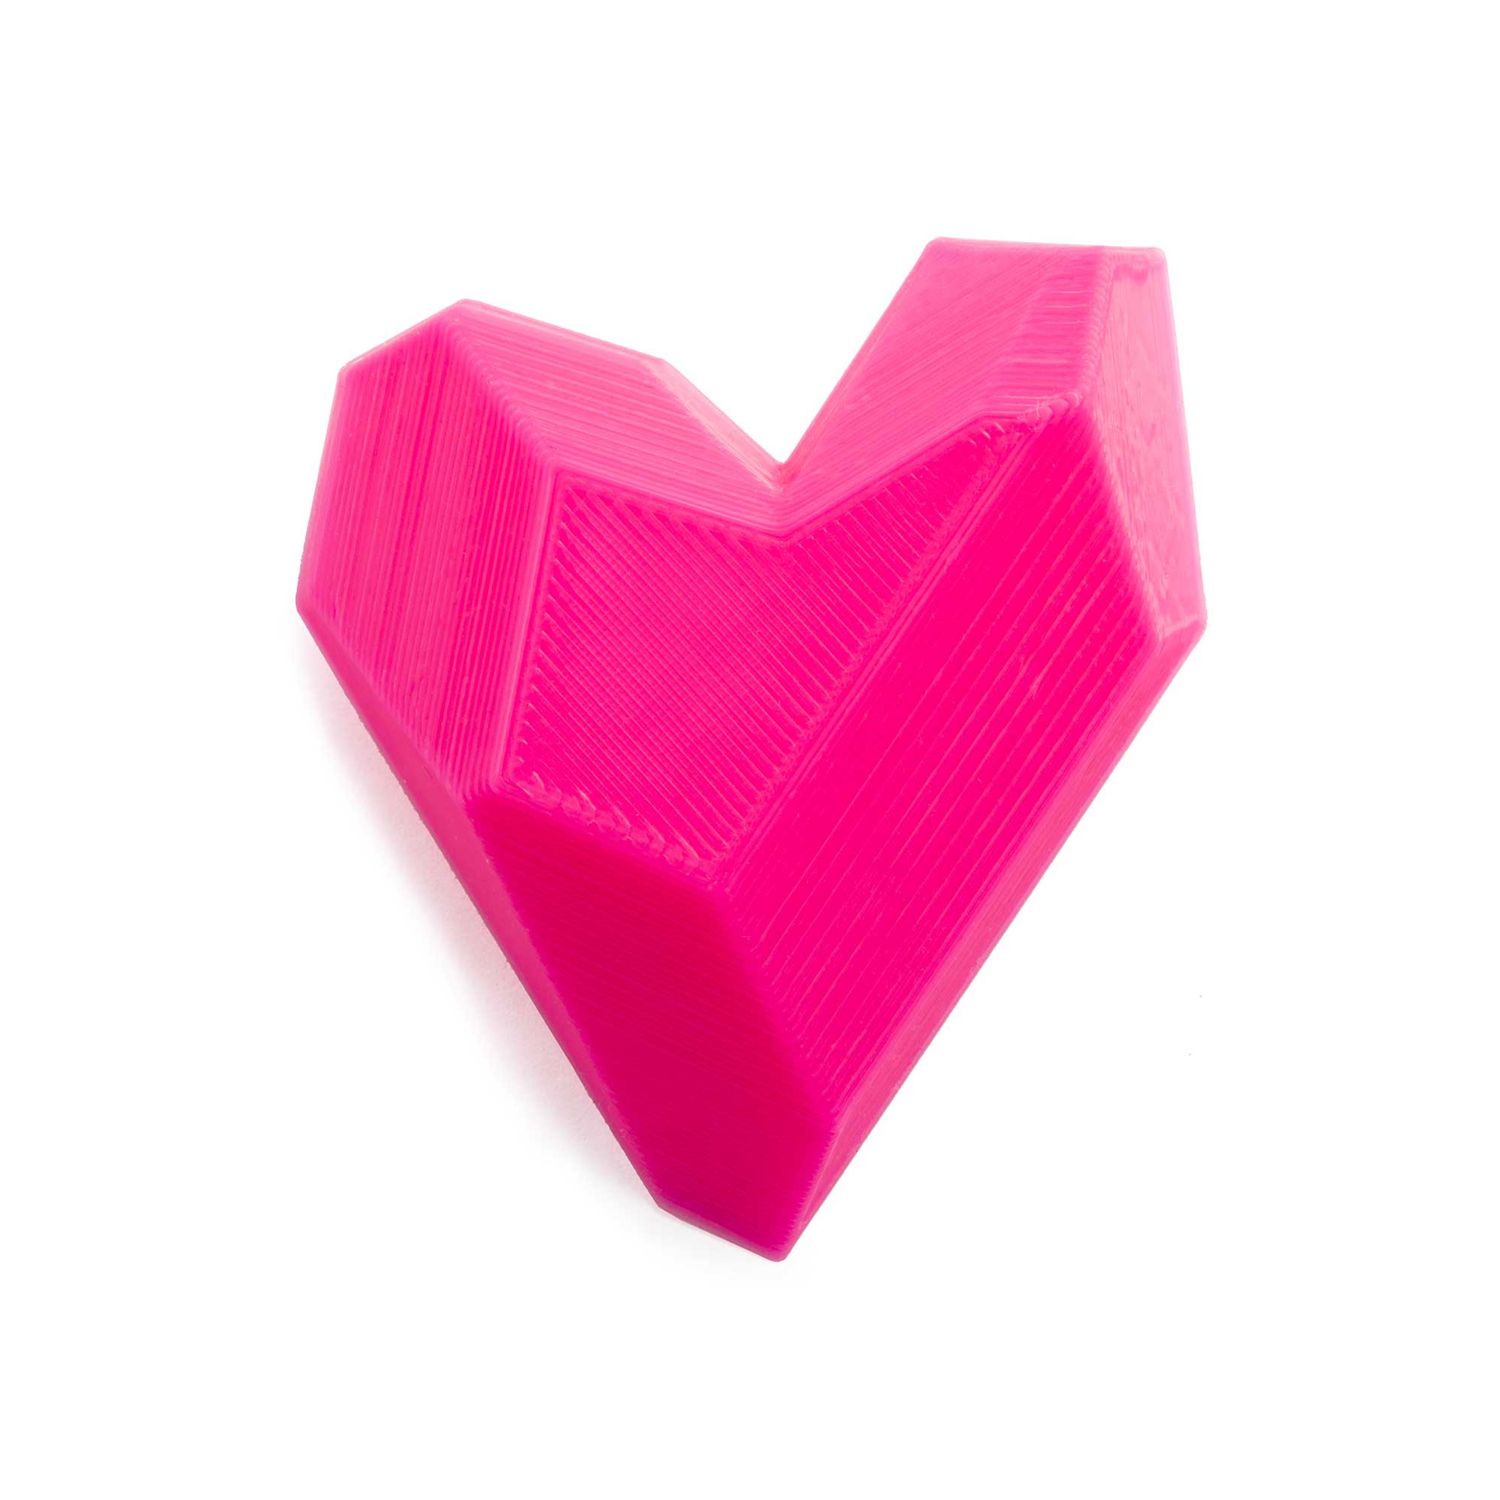 Maison 203: Heart Brooch – Hot Pink Product Image 1 of 3